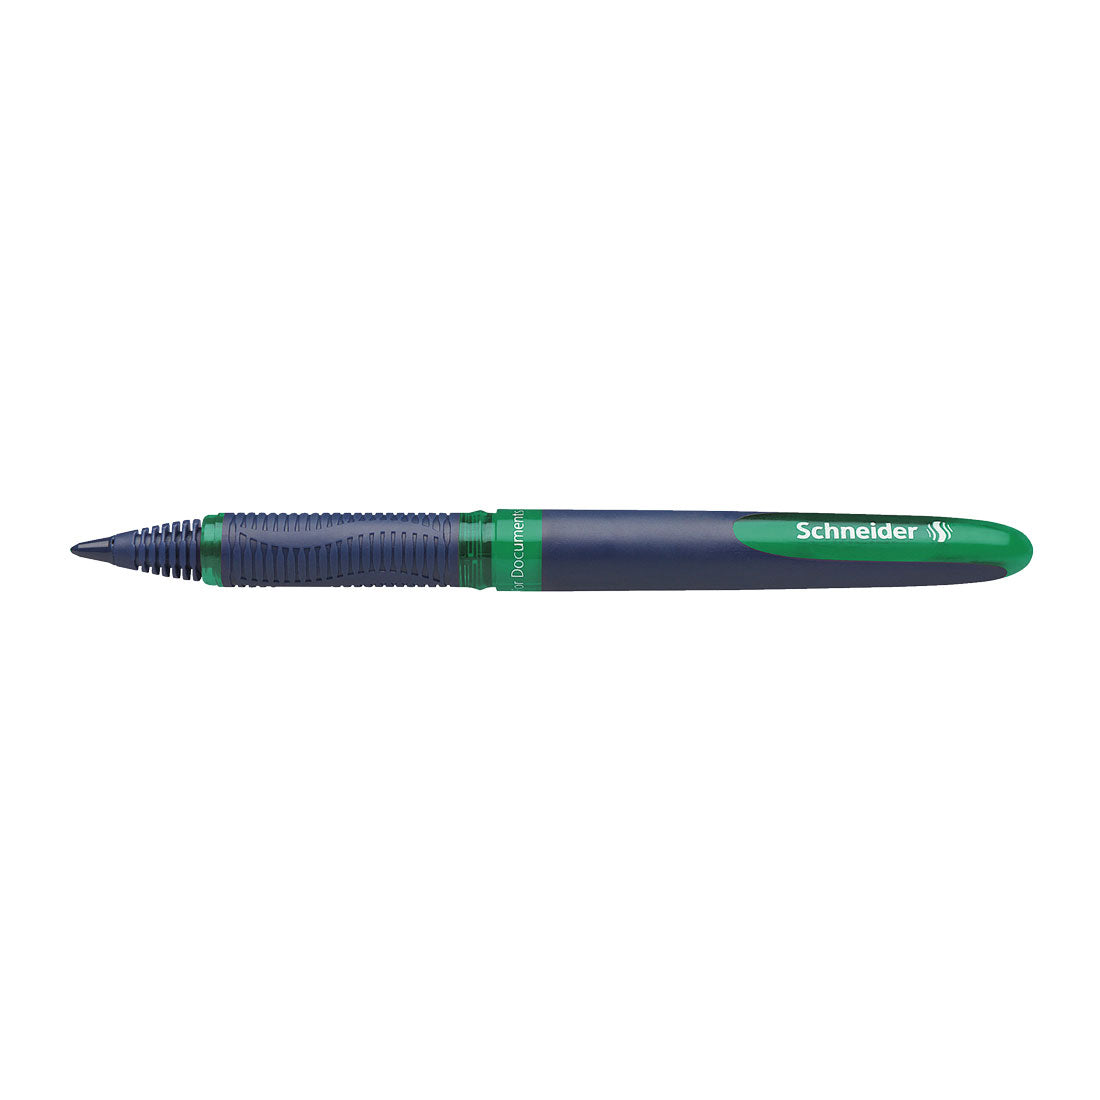 One Business Rollerball Pens 0.6mm, Box of 10#colour_green